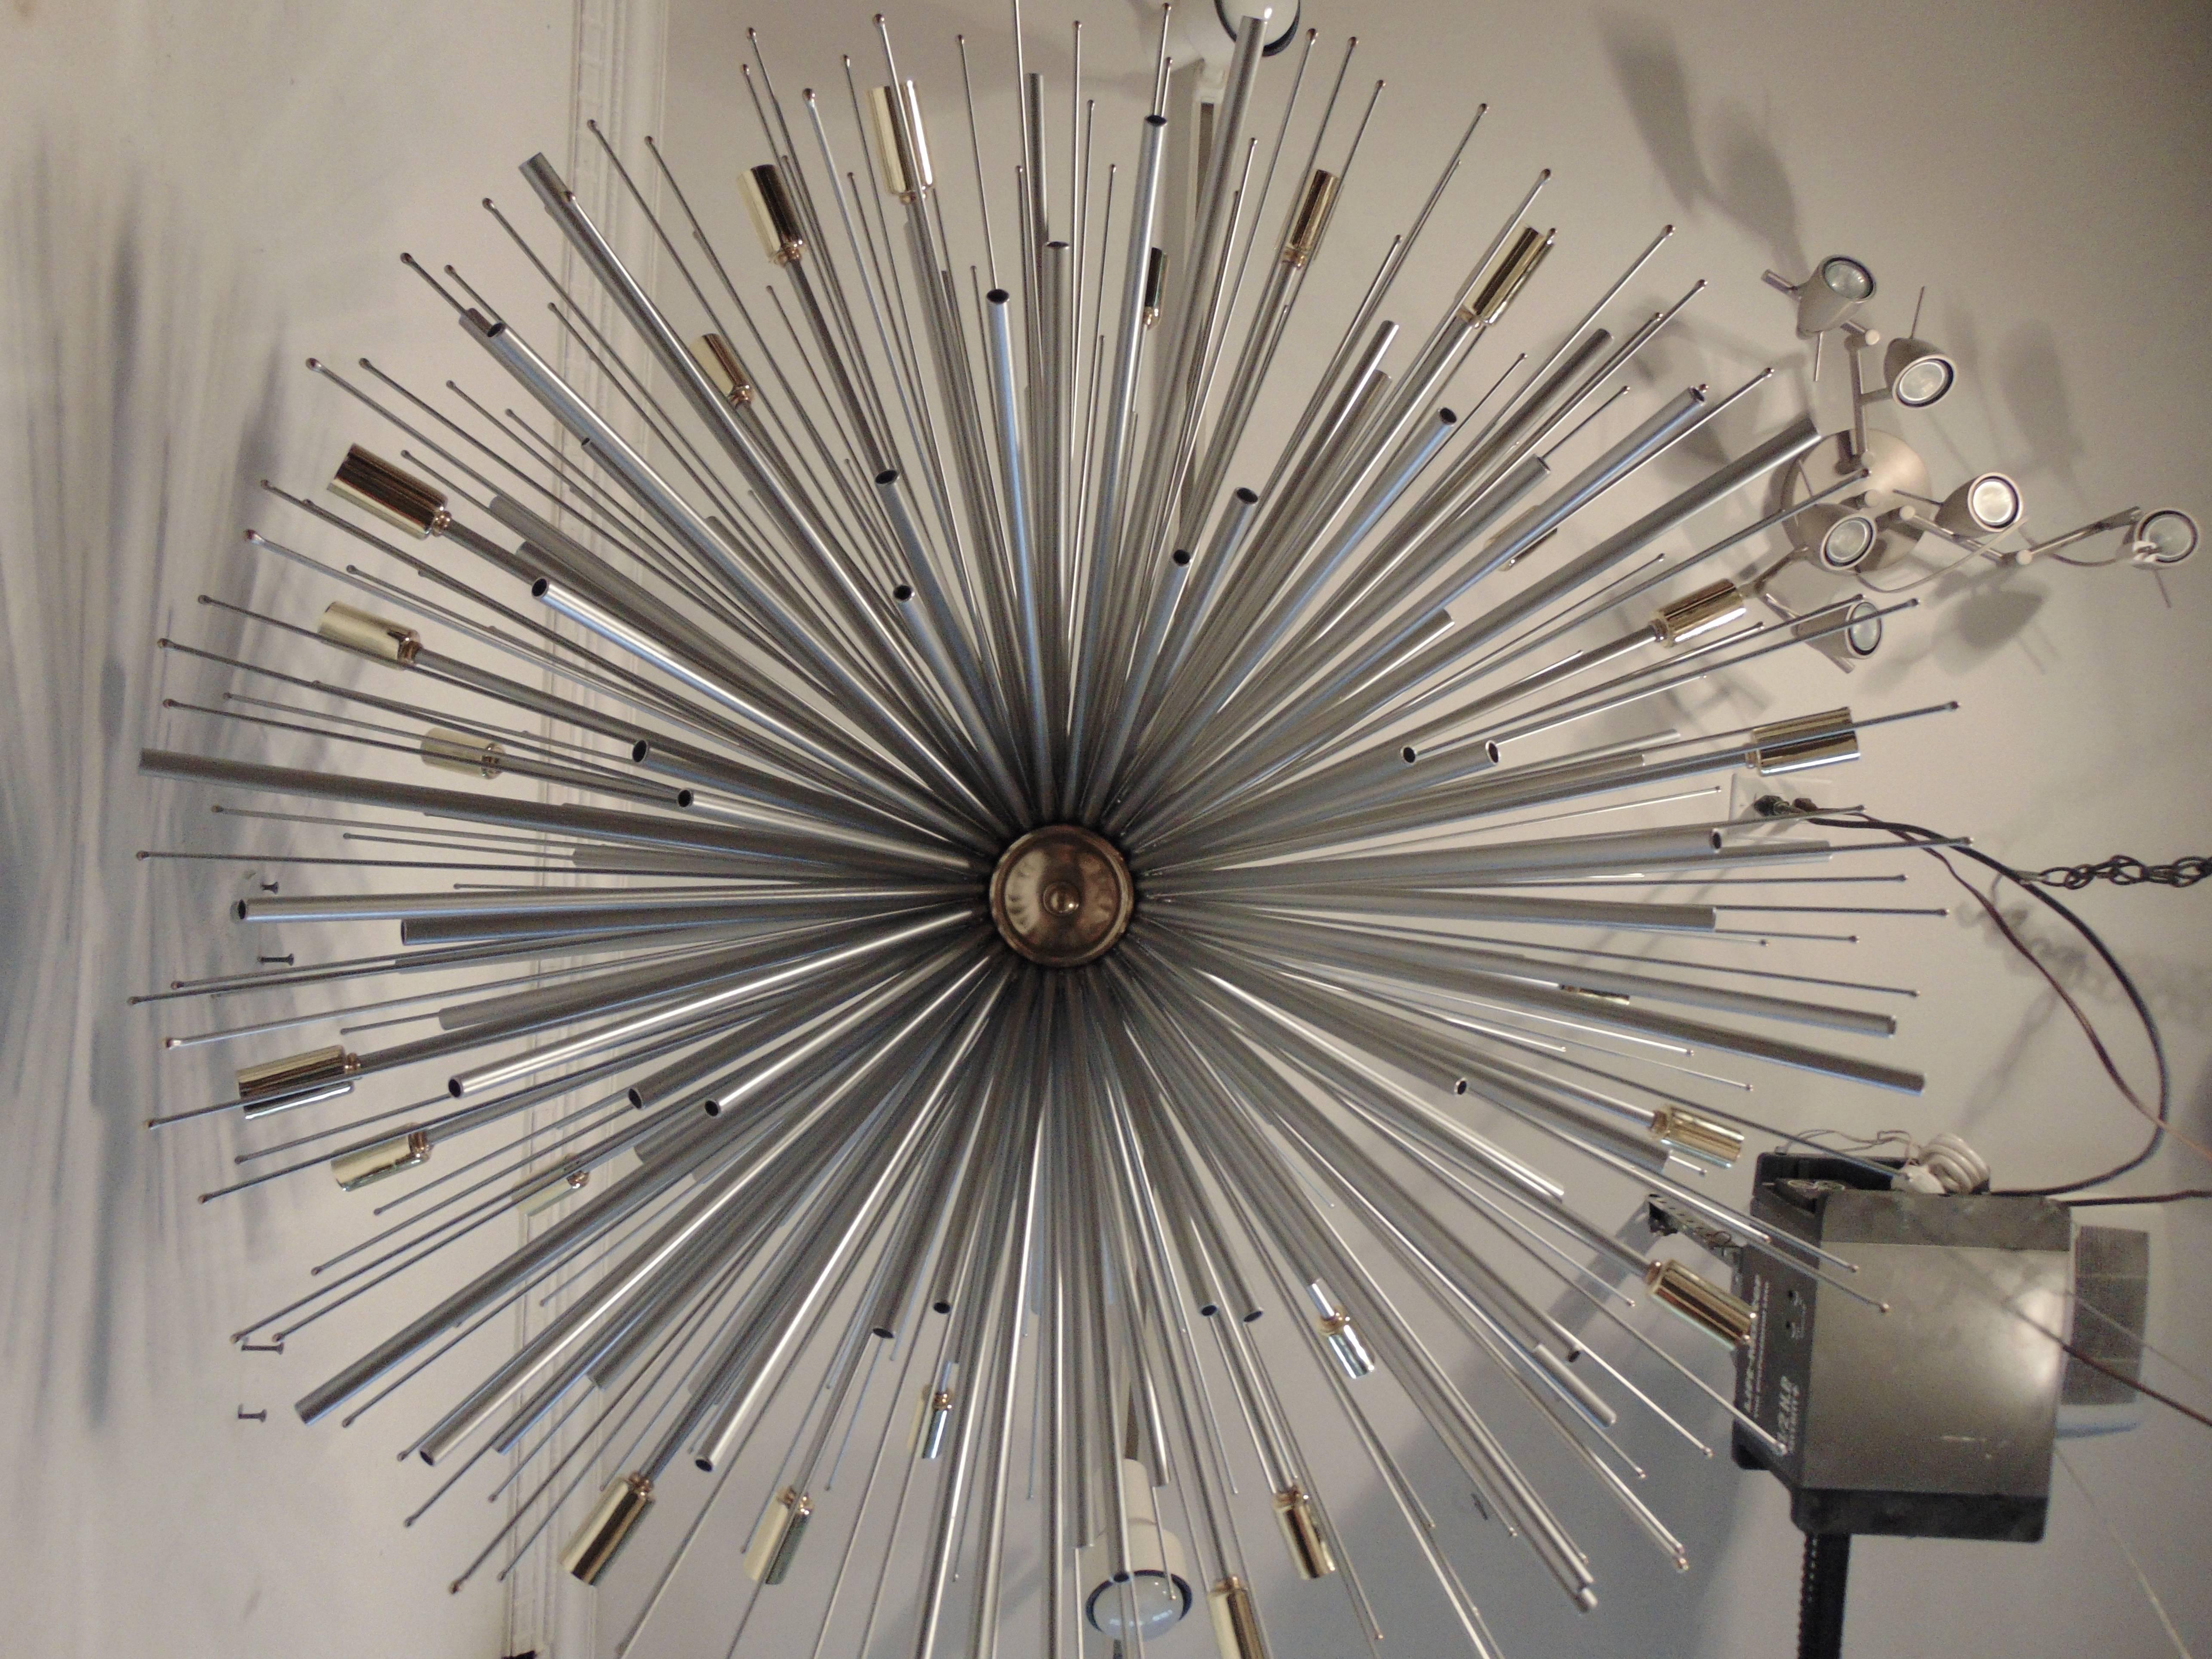 A full array style supernova chandelier by Lou Blass. Custom-made to size and finish. The diameter is 30